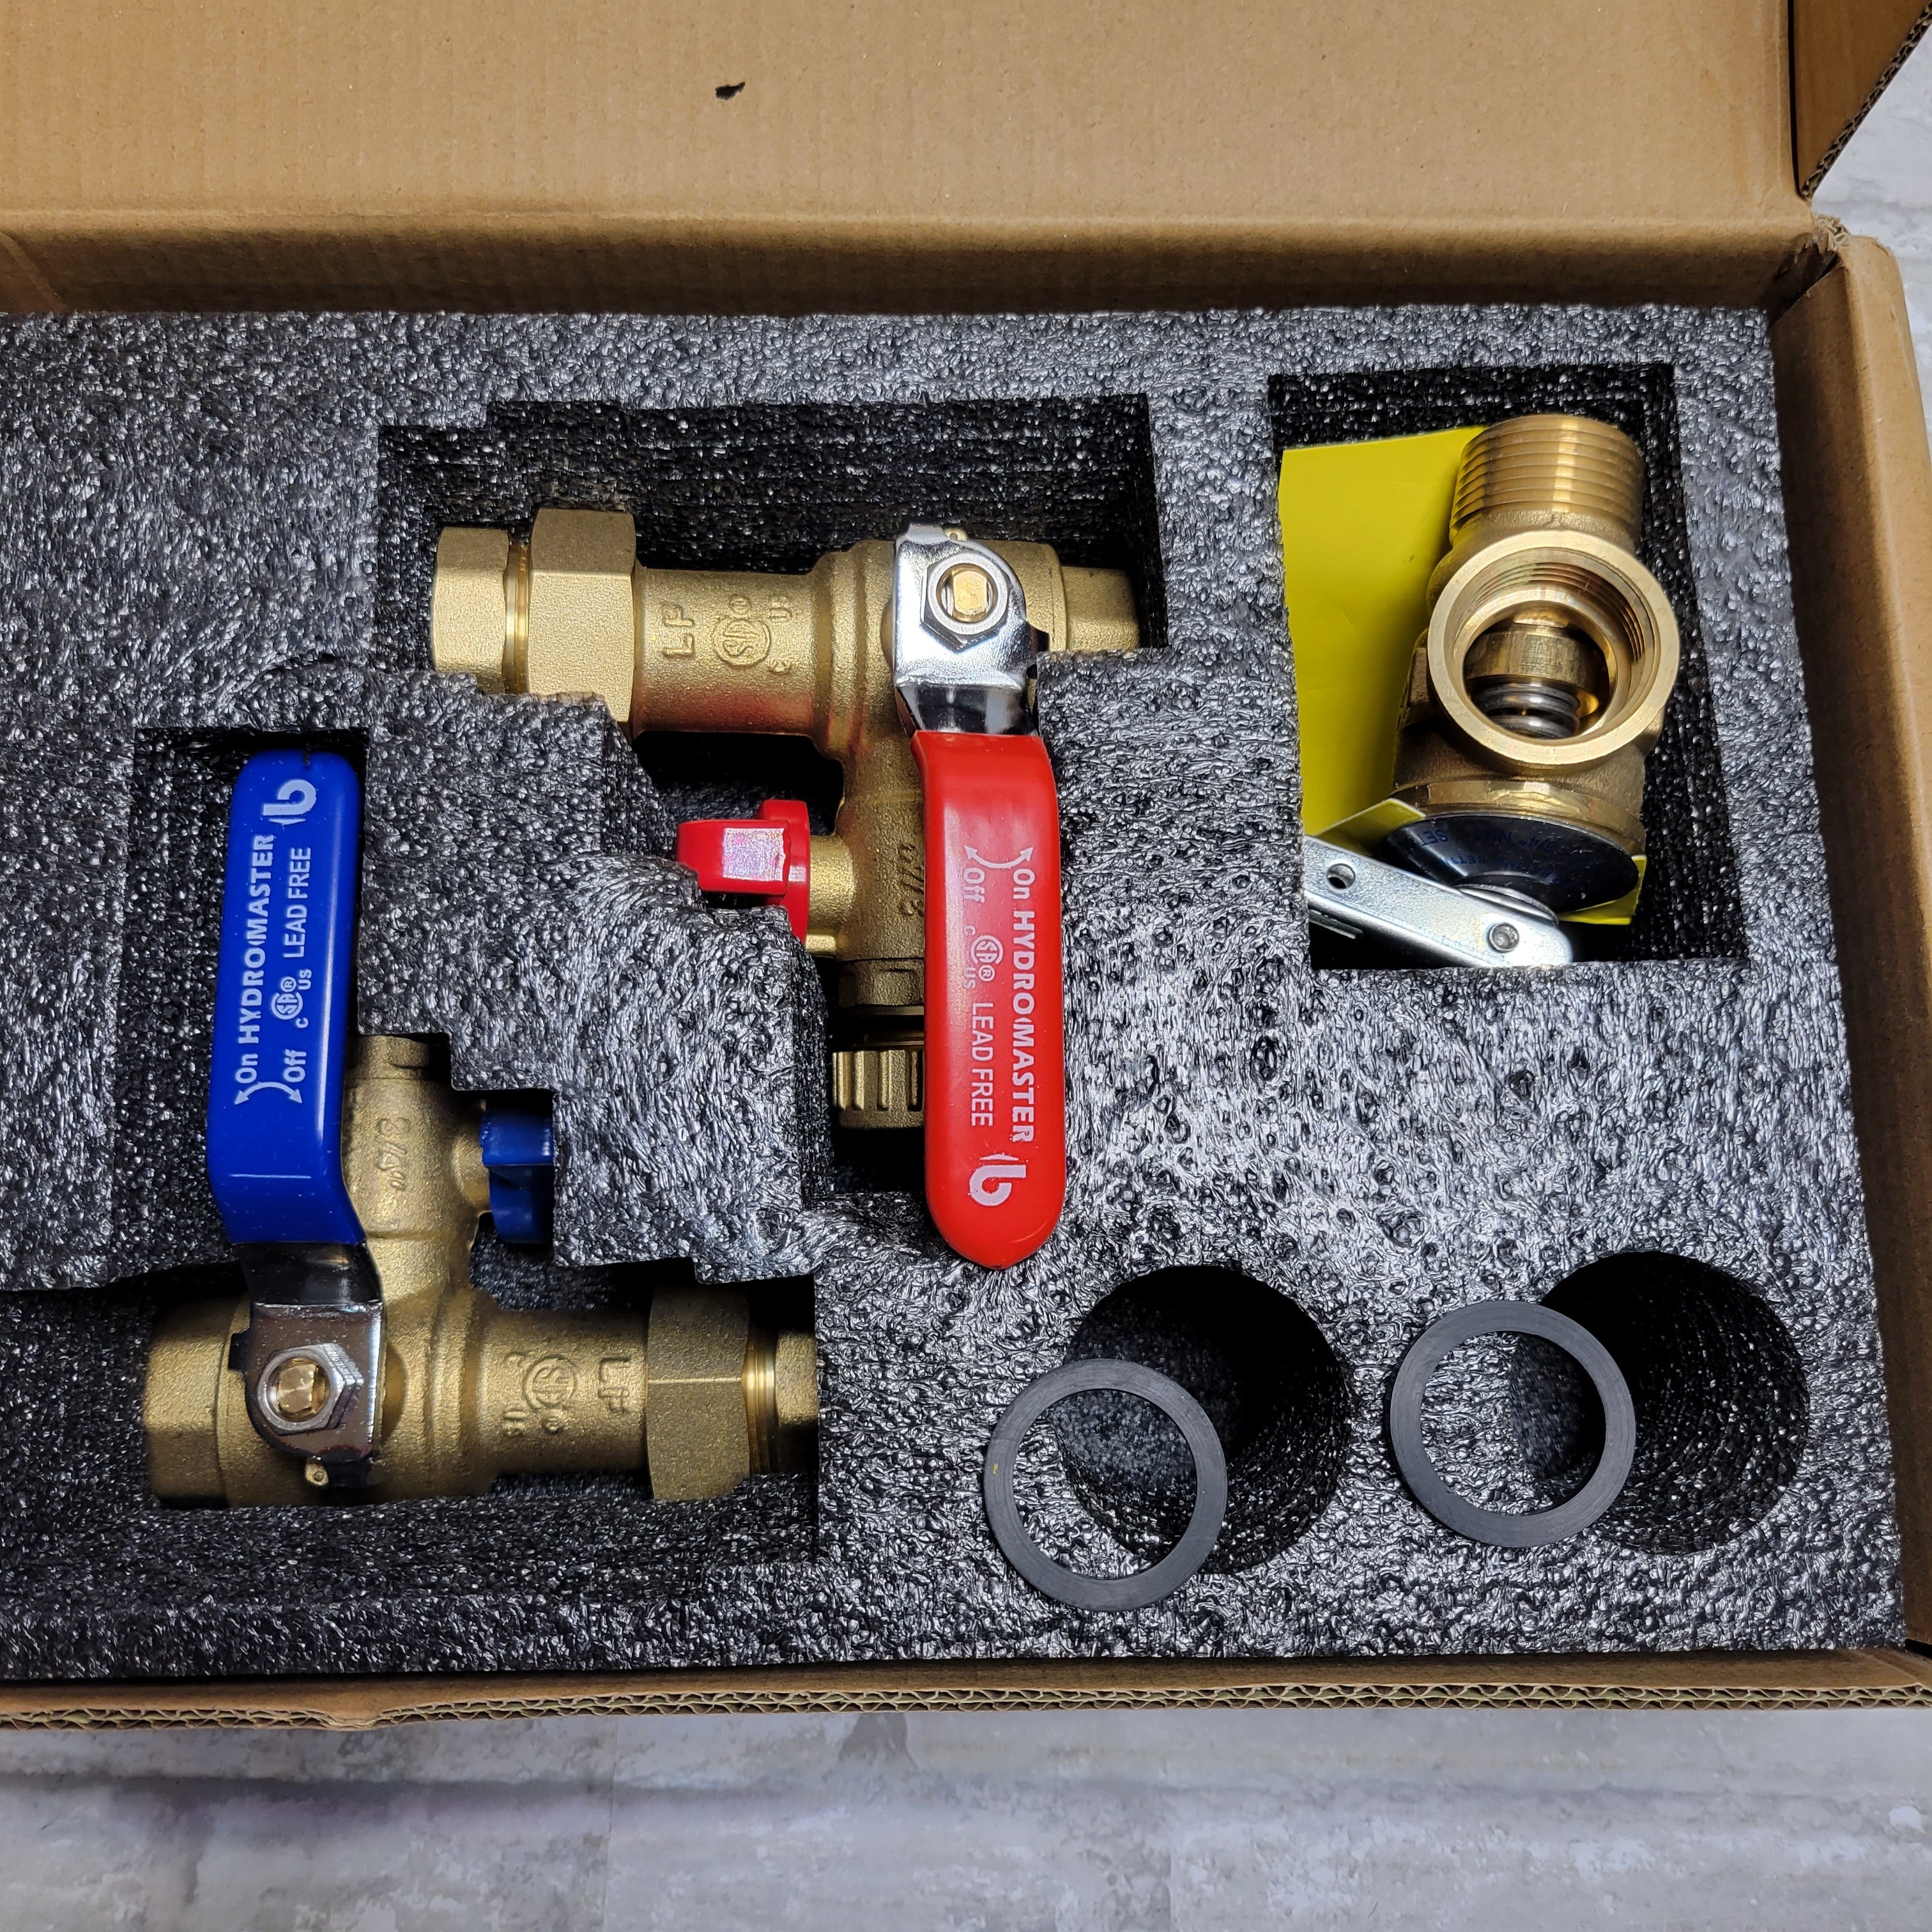 HYDRO MASTER Tankless Water Heater Service Valve Kit with Pressure Relief Valve (8041997959406)